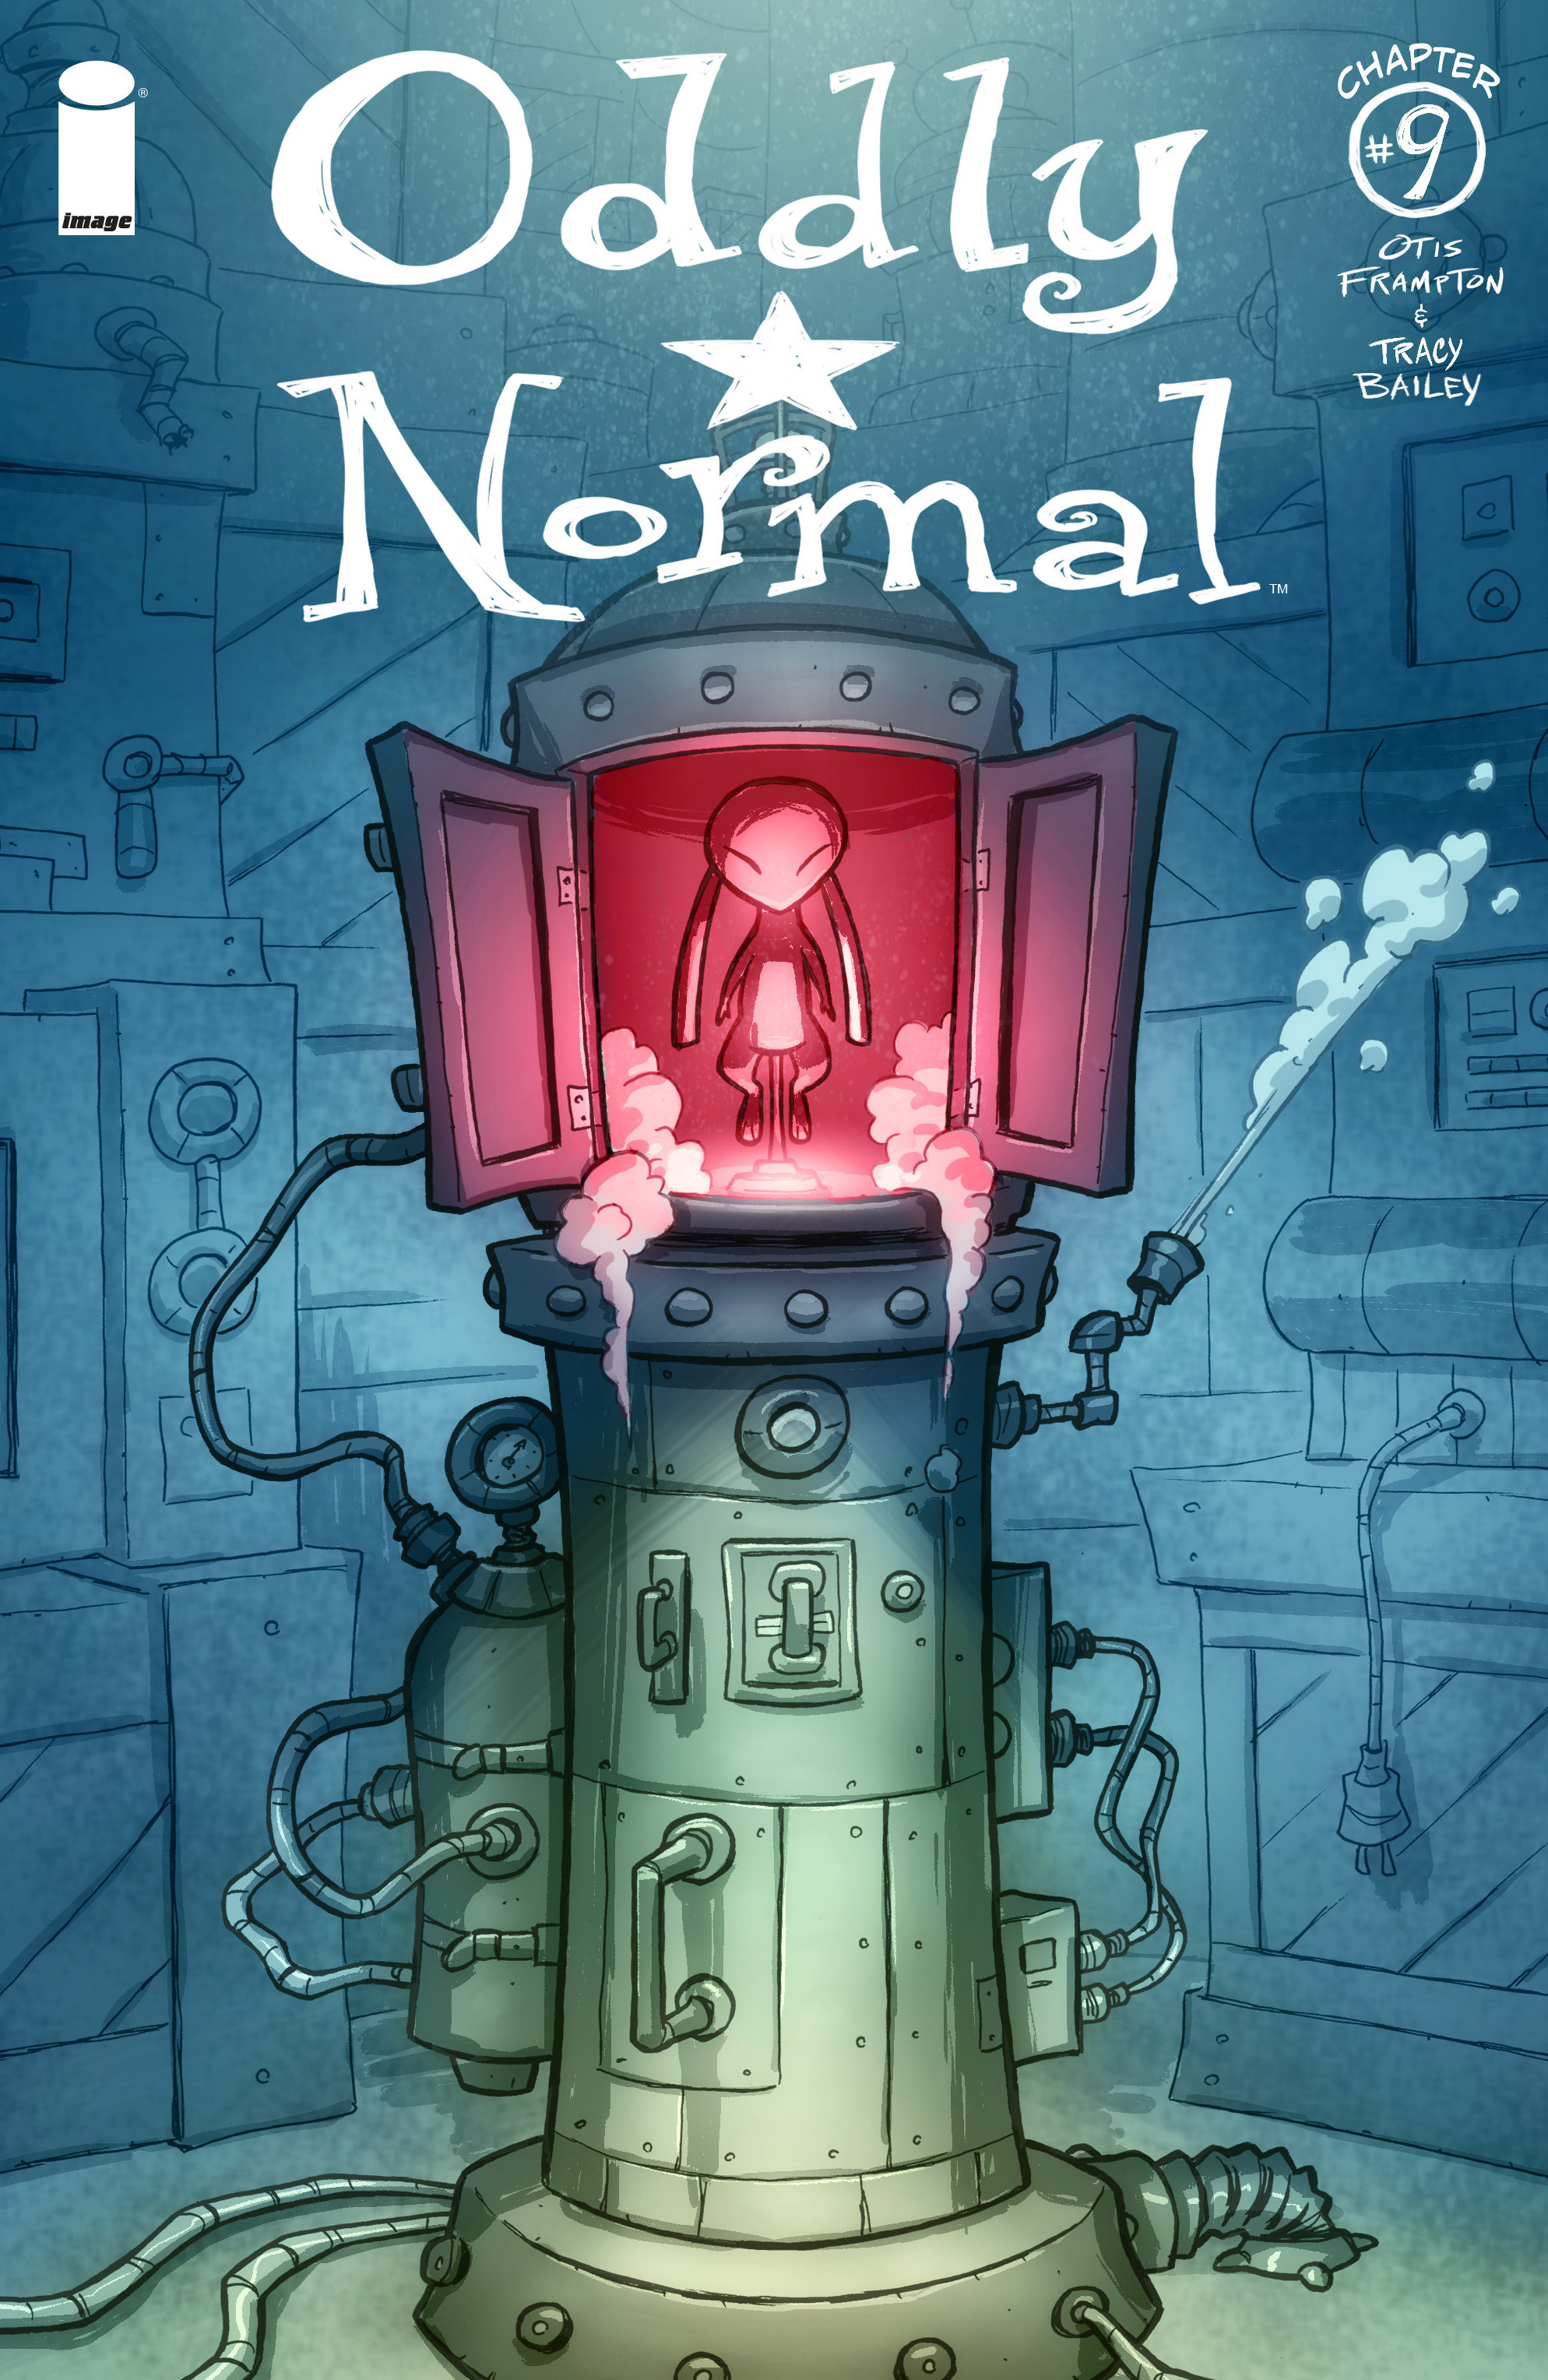 Read online Oddly Normal (2014) comic -  Issue #9 - 1